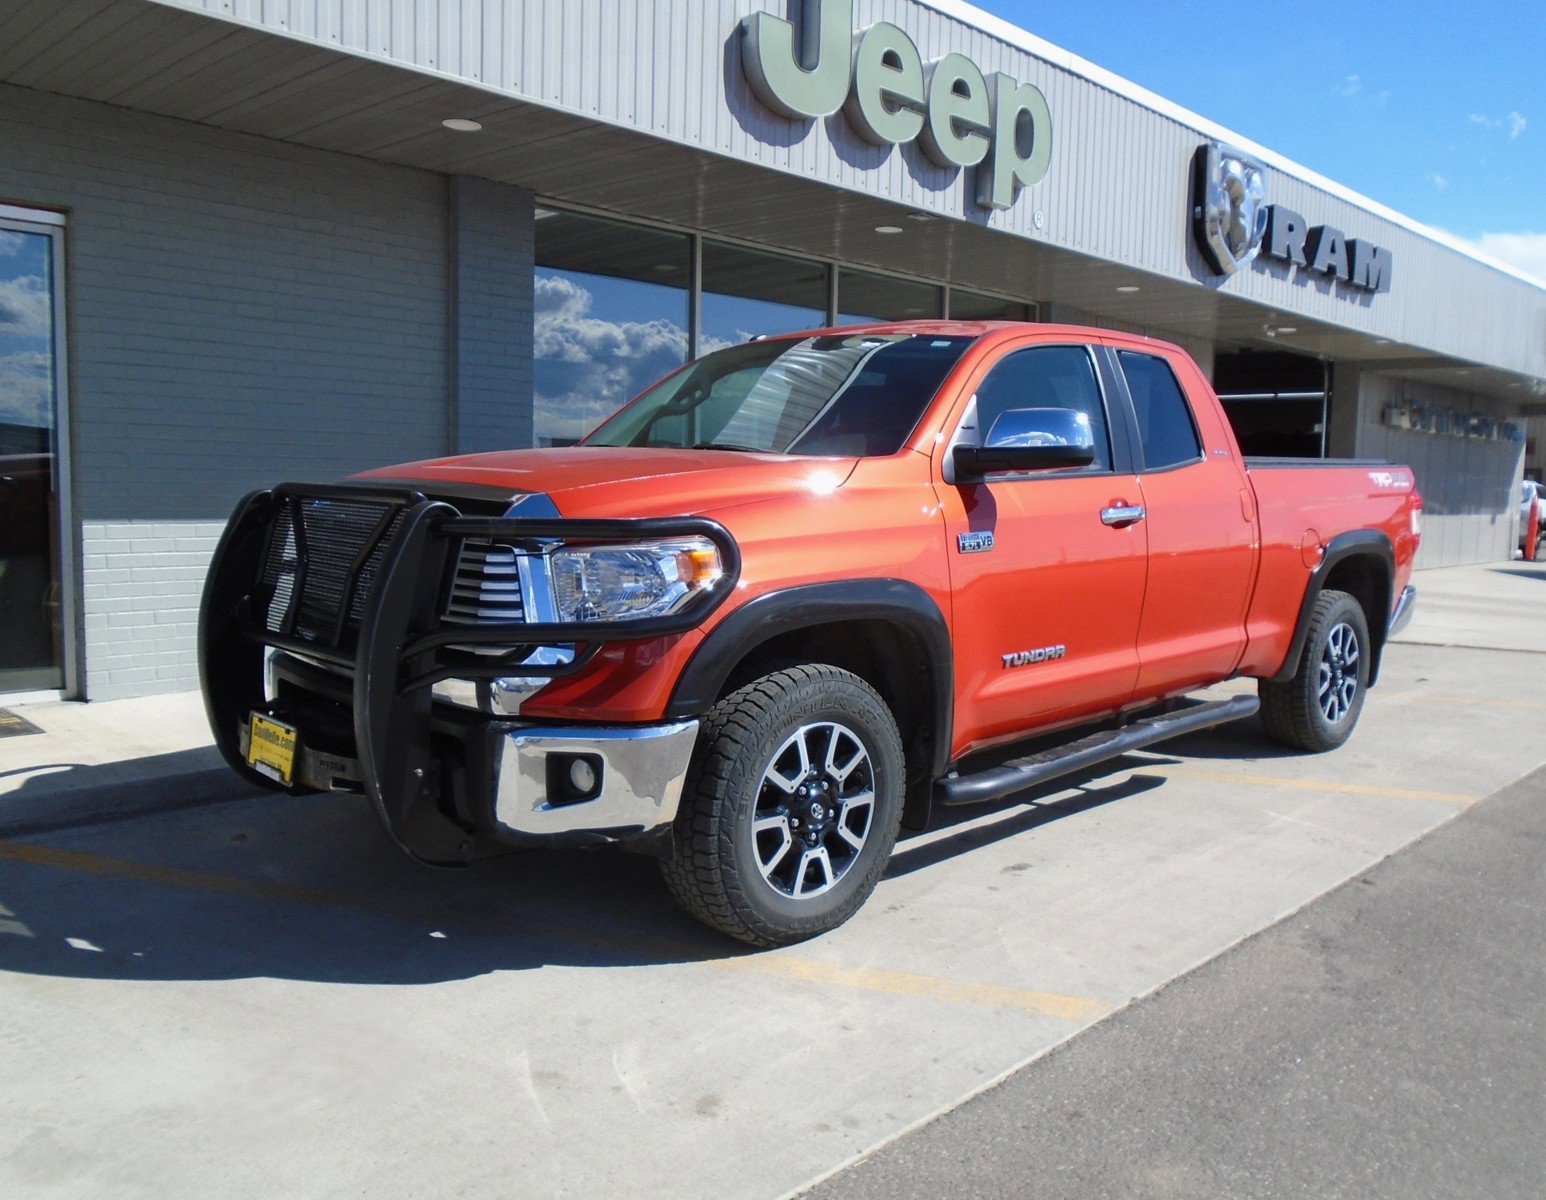 Used 2017 Toyota Tundra Limited with VIN 5TFBW5F13HX626682 for sale in Sauk Centre, Minnesota